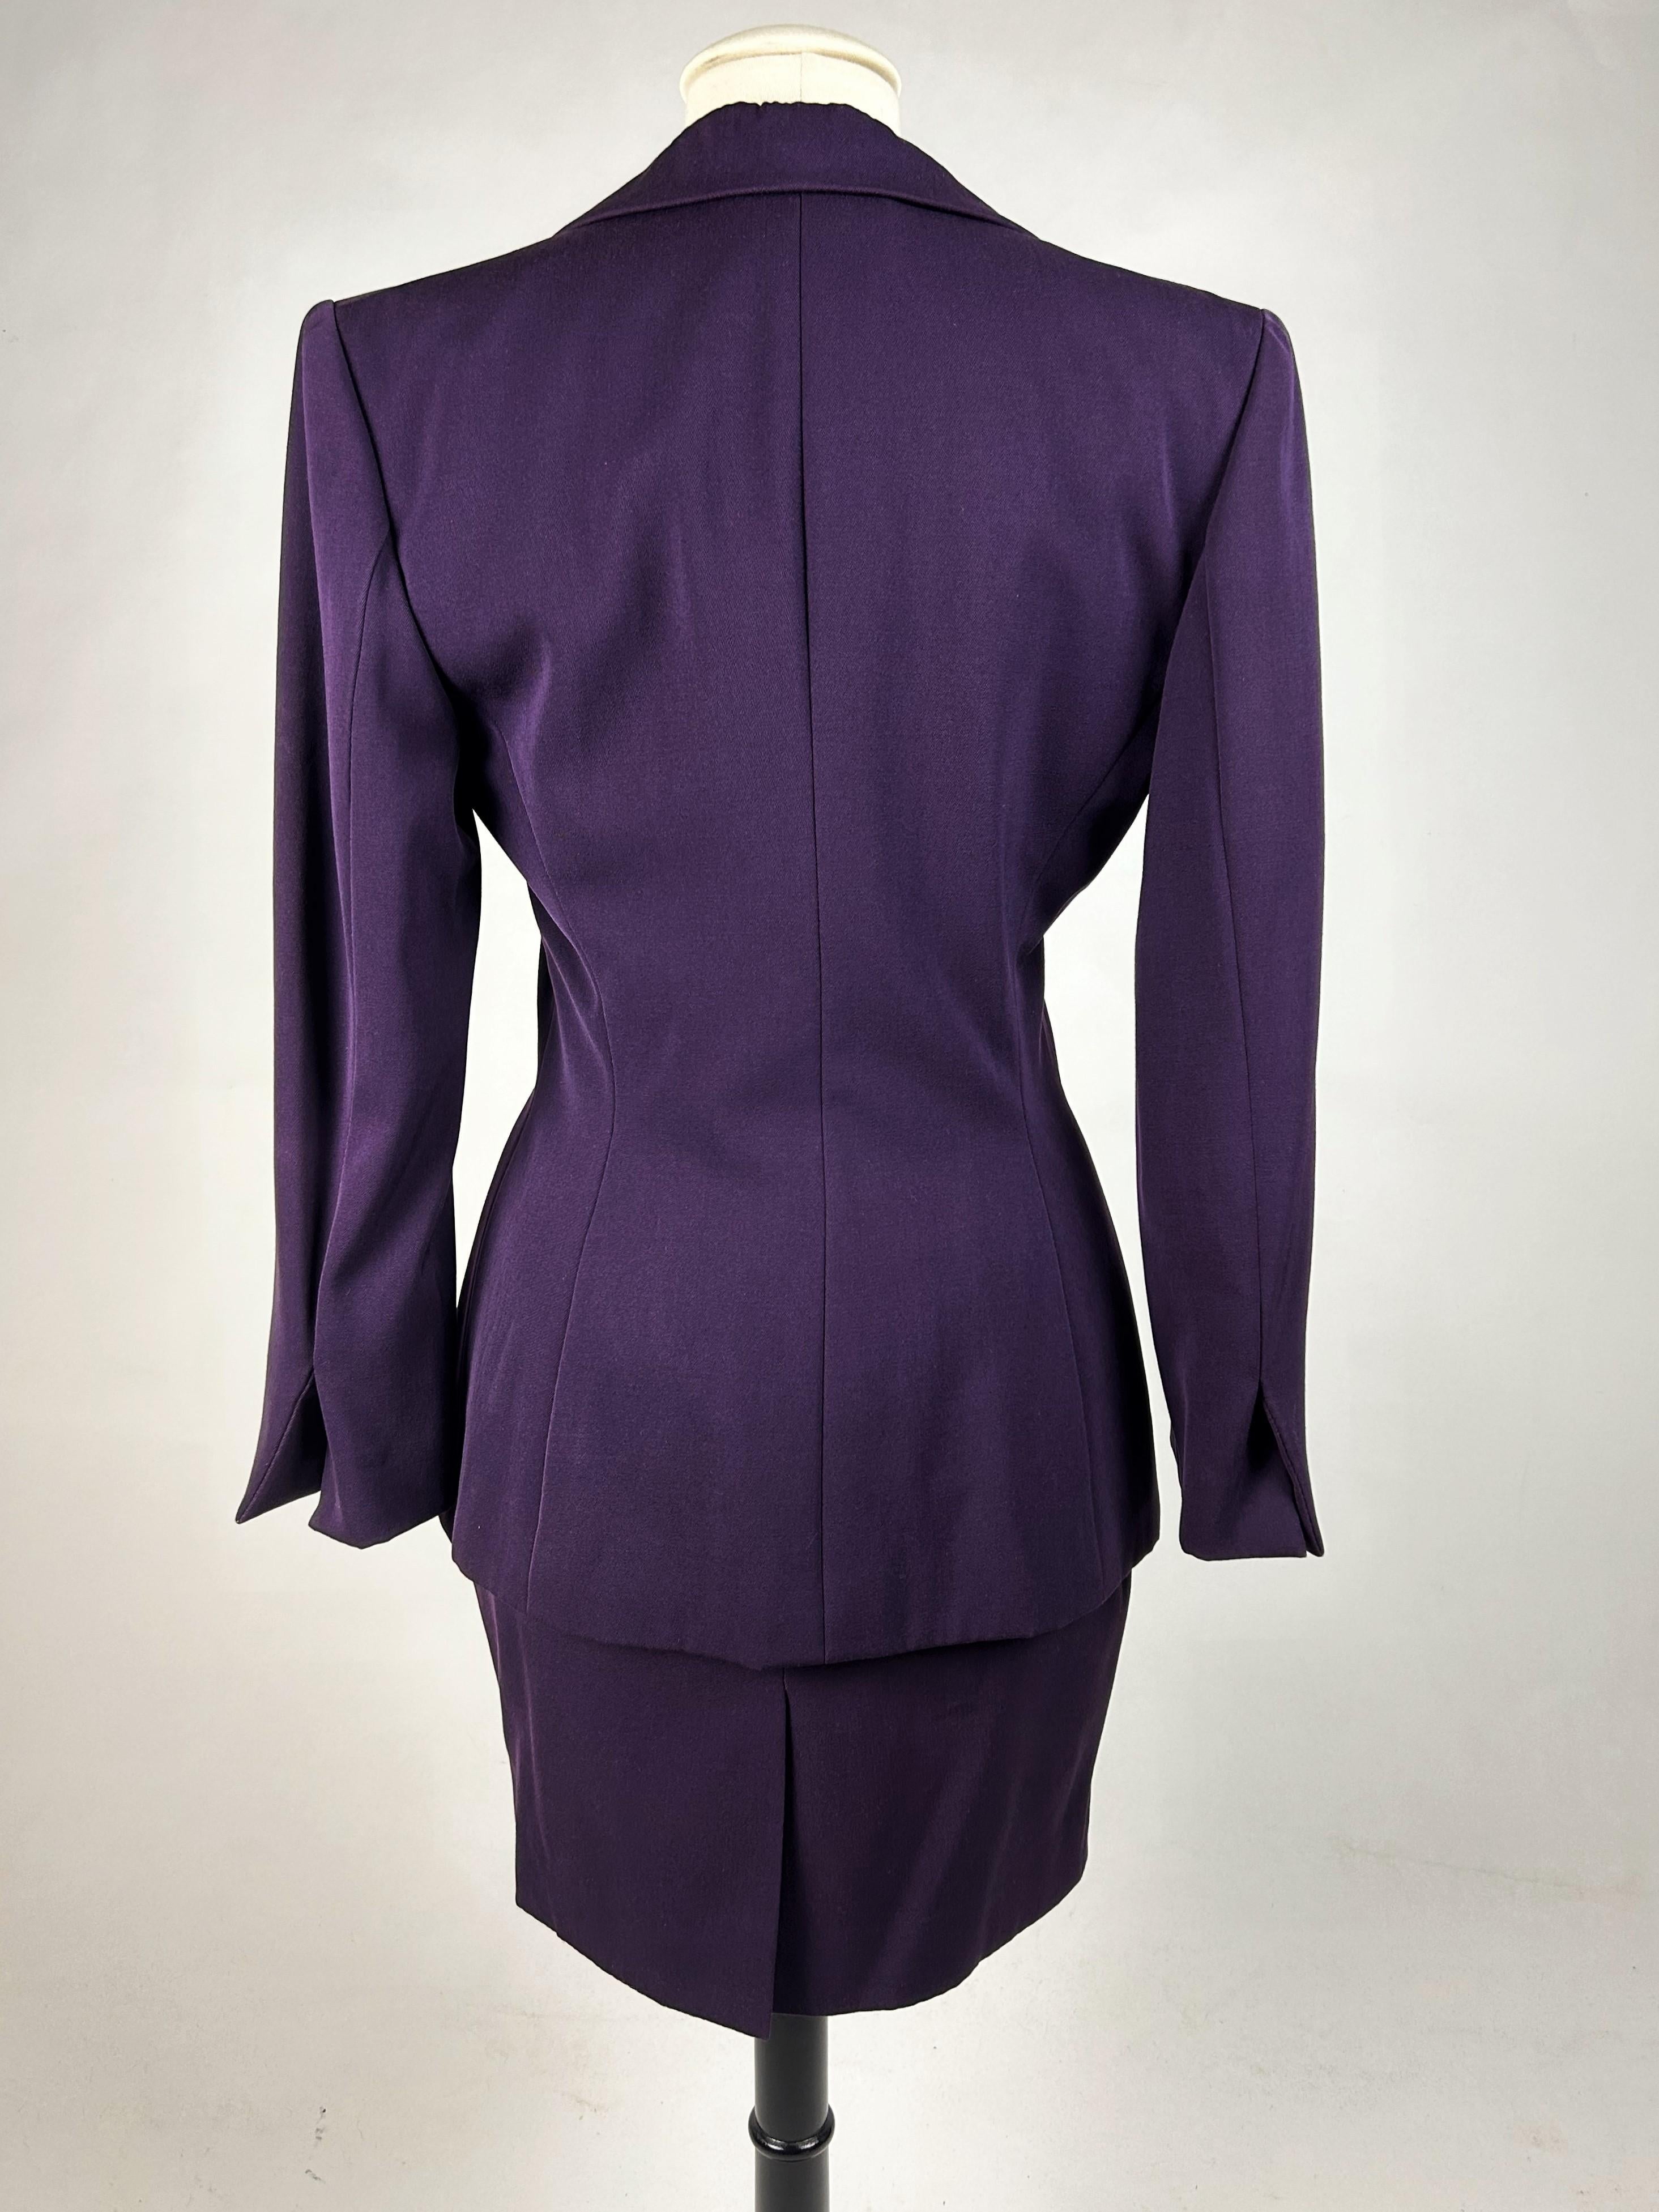 Skirt suit by Gianfranco Ferré for Christian Dior Haute Couture Circa 1995 For Sale 5